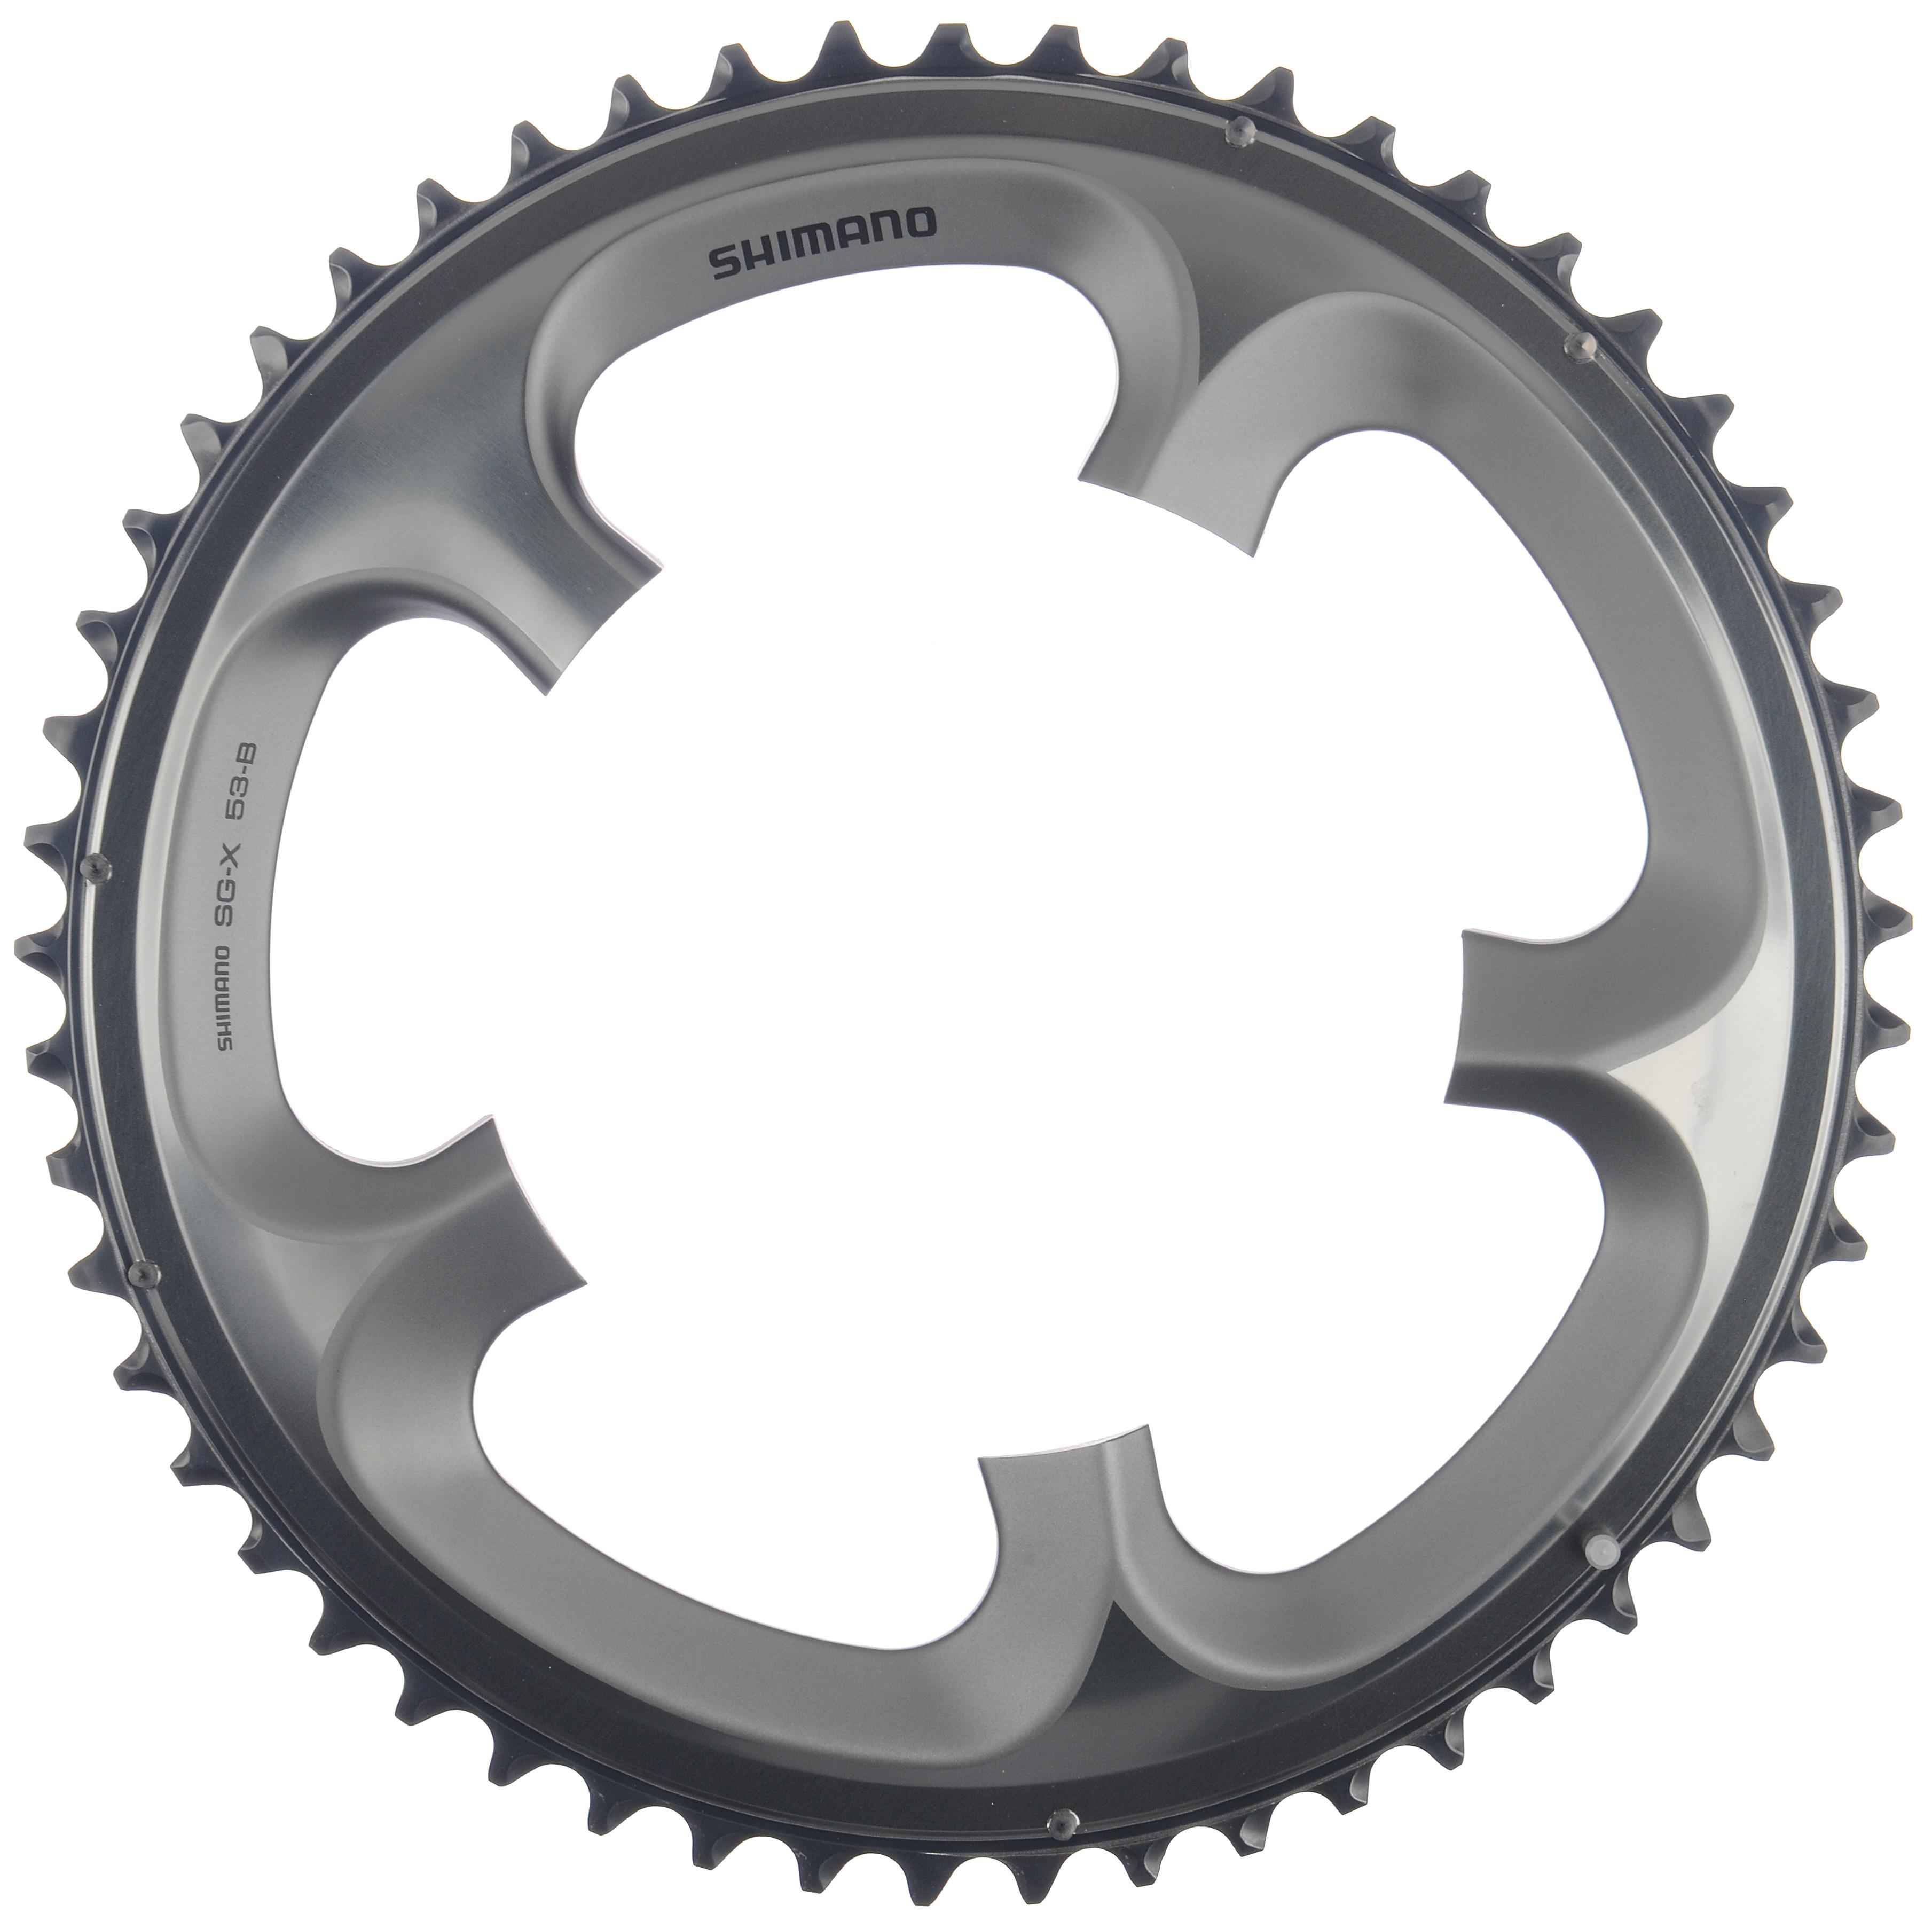 Shimano Ultegra Fc6700 10sp Double Chainrings - Silver